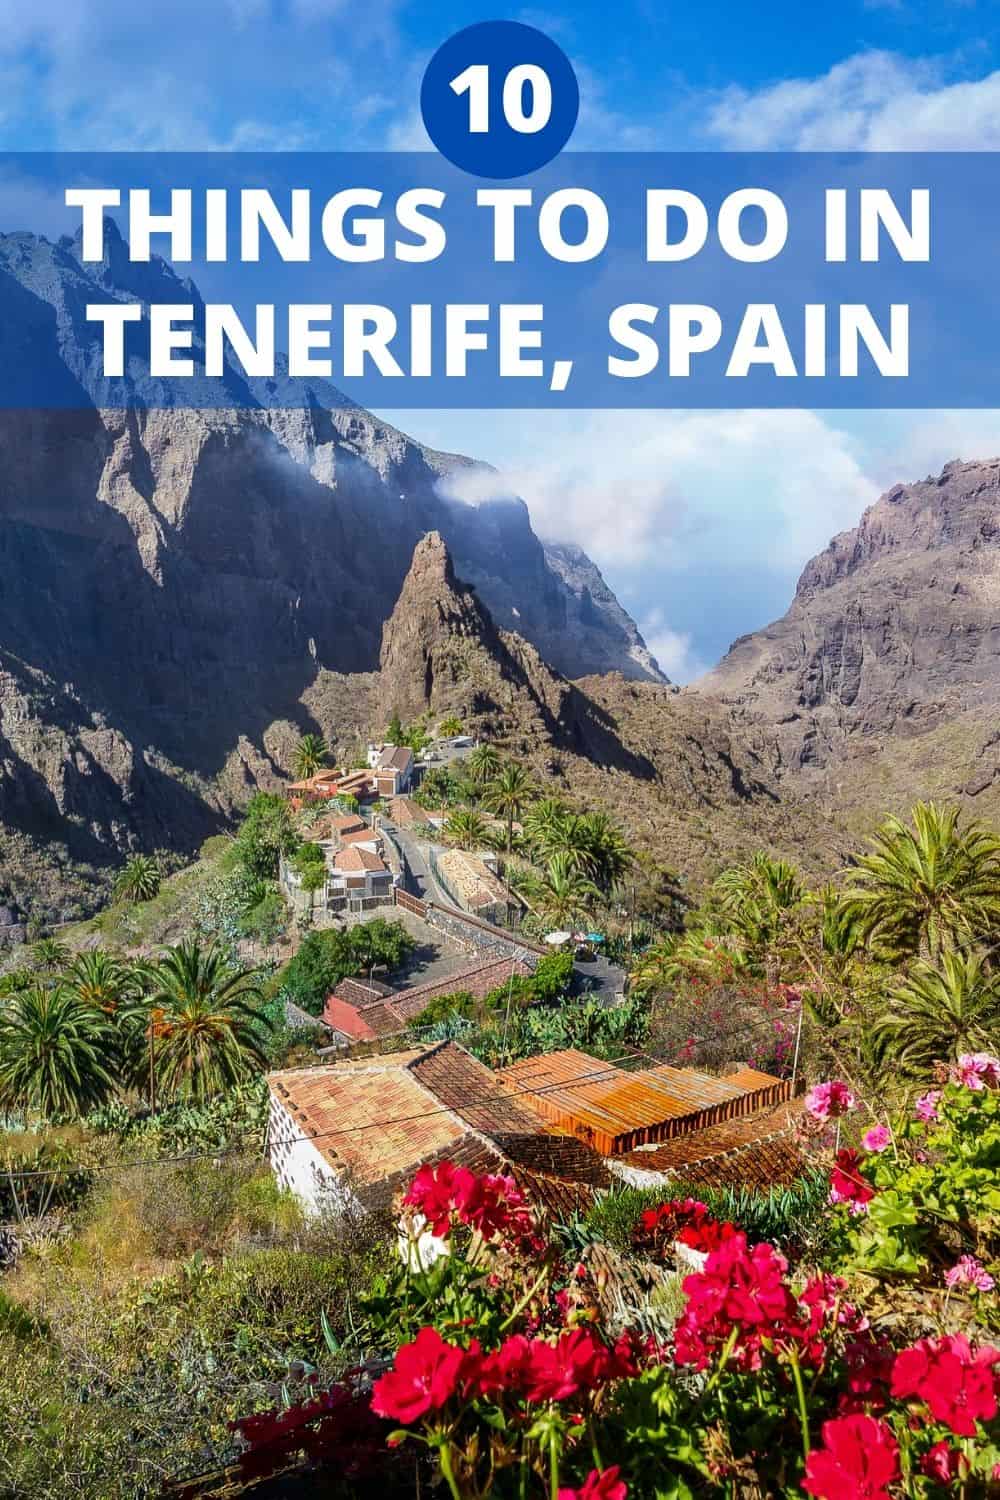 Climbing a volcano, relaxing on a beach, bathing in natural pools and walking through lush forests are just a few things to do in Tenerife. #travelspain #tenerifespain